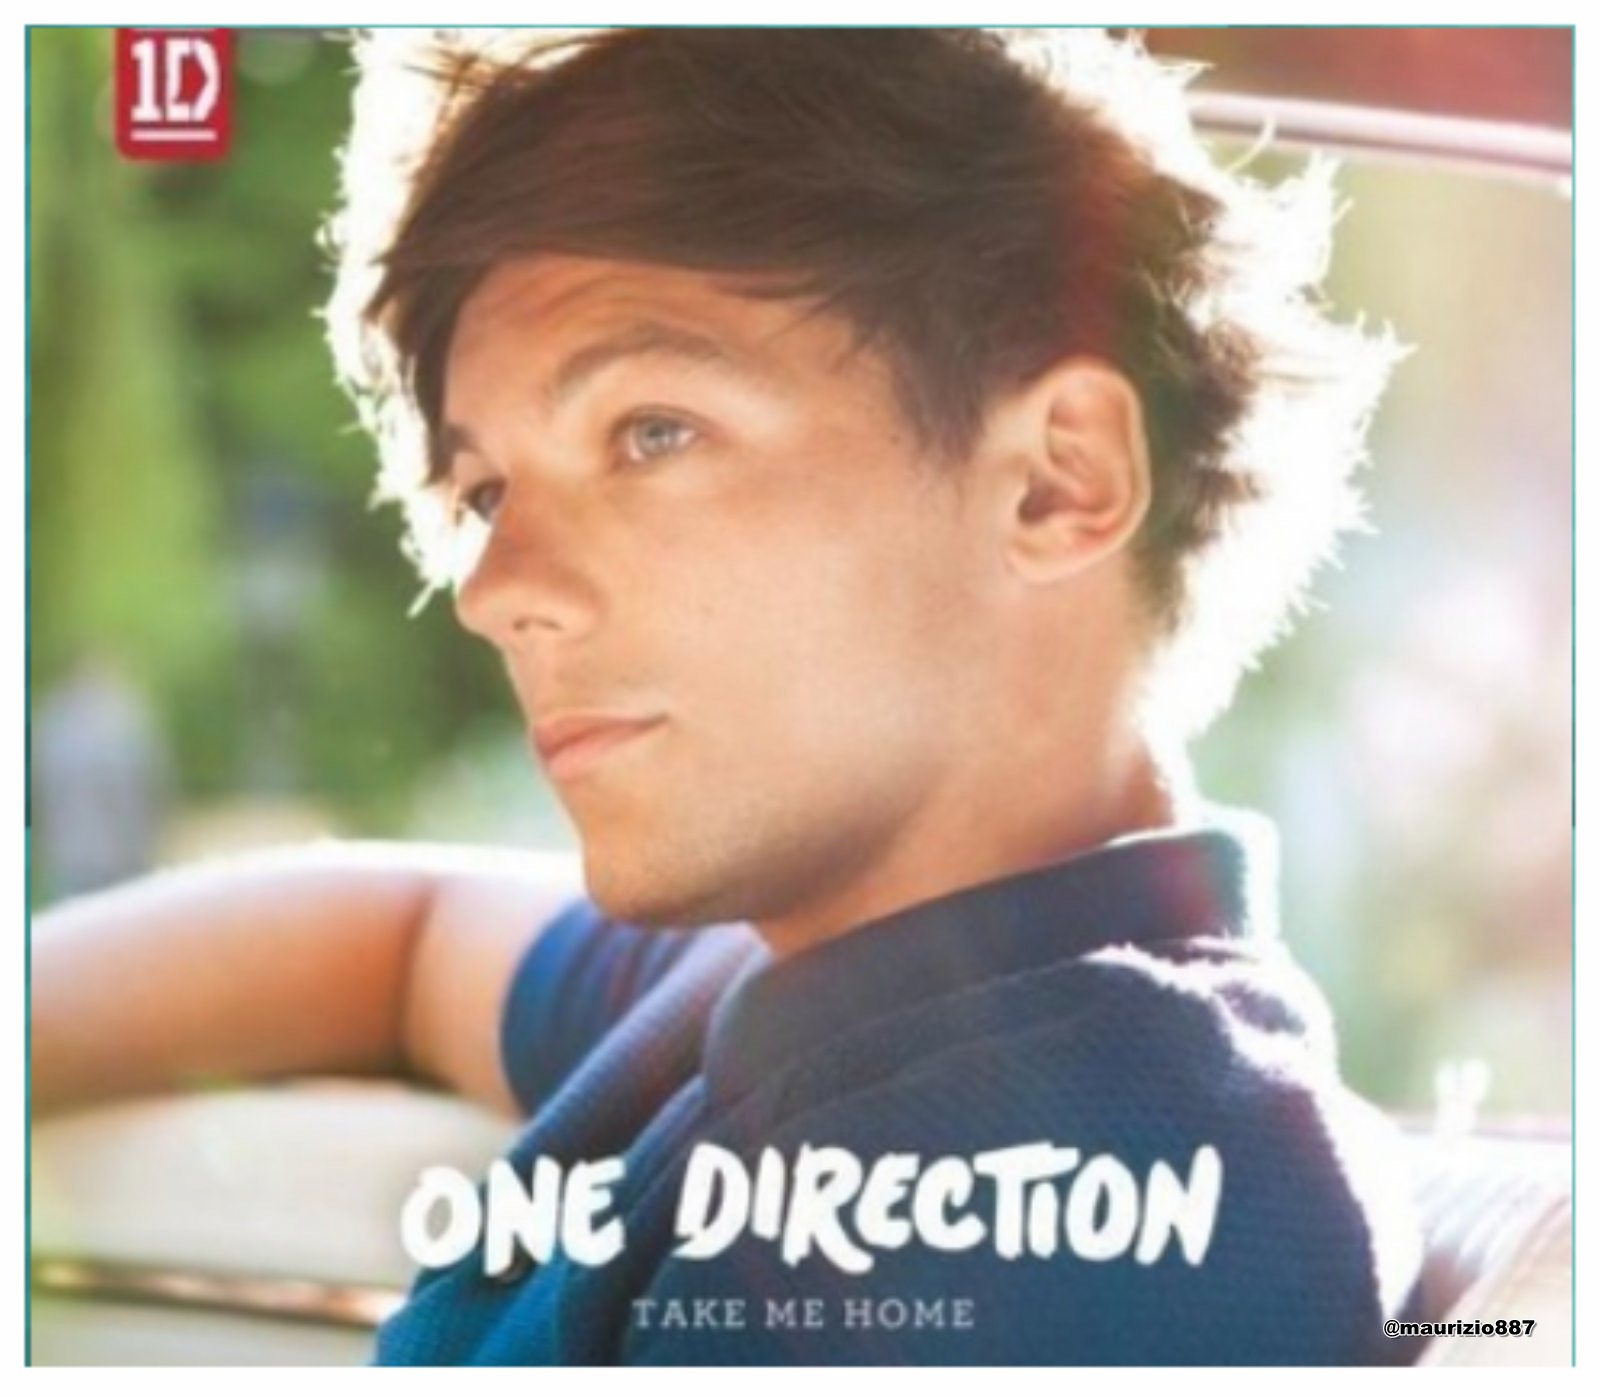 A Thousand Years (Larry Styllinson) HOT  (parte 1) Louis-Tomlinson-Take-Me-Home-2012-Slipcase-one-direction-32434330-1600-1398